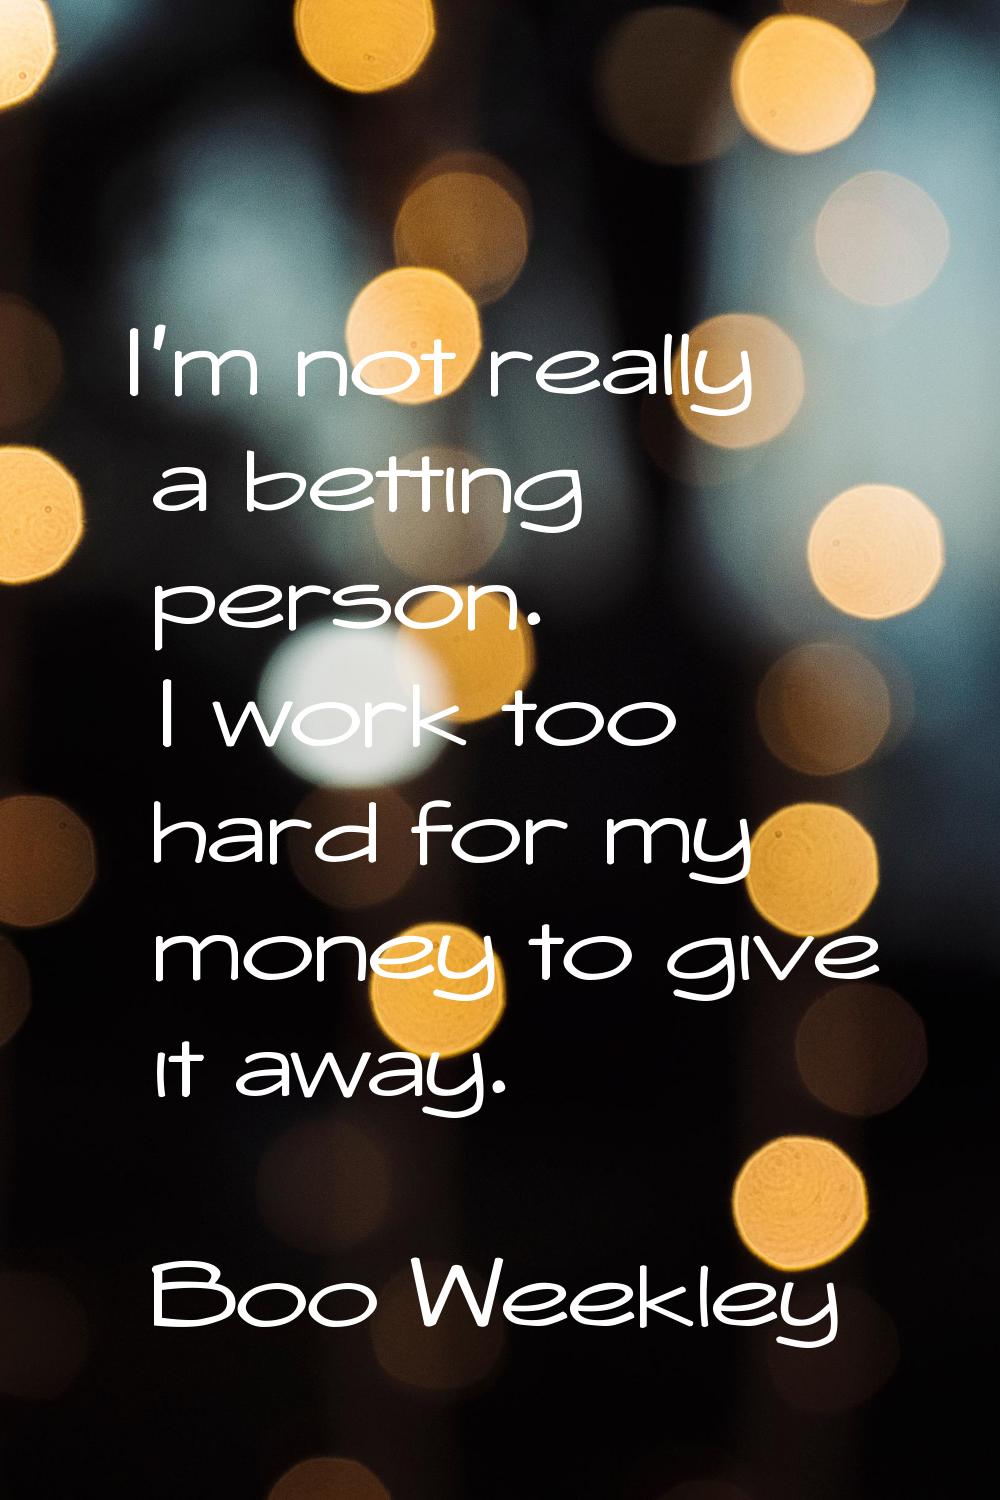 I'm not really a betting person. I work too hard for my money to give it away.